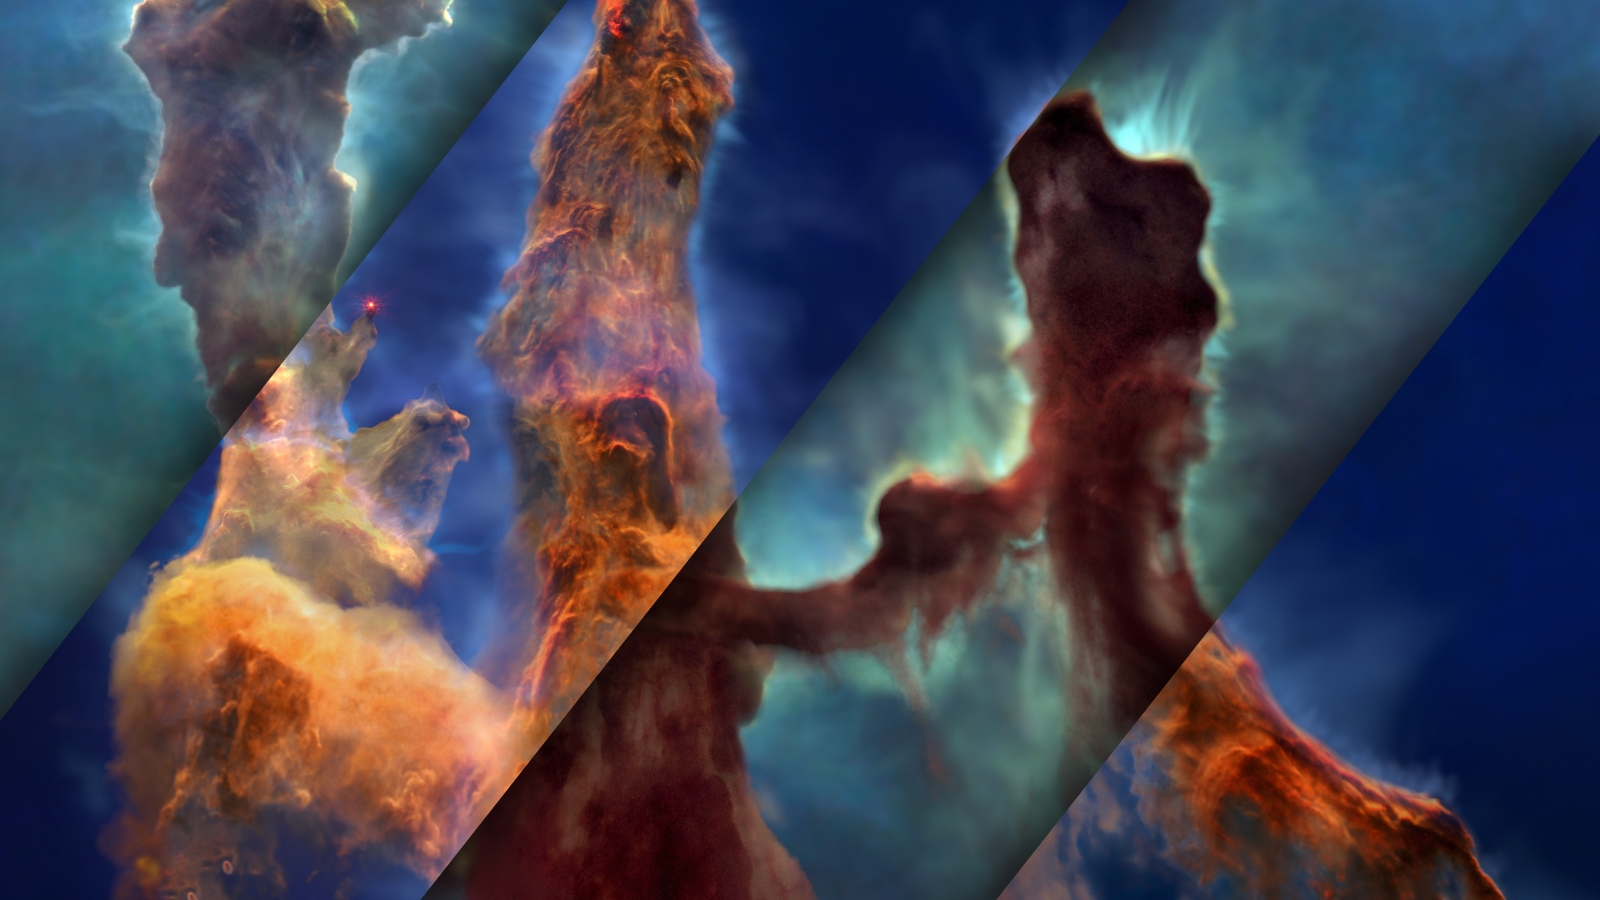 Pillars of Creation images created